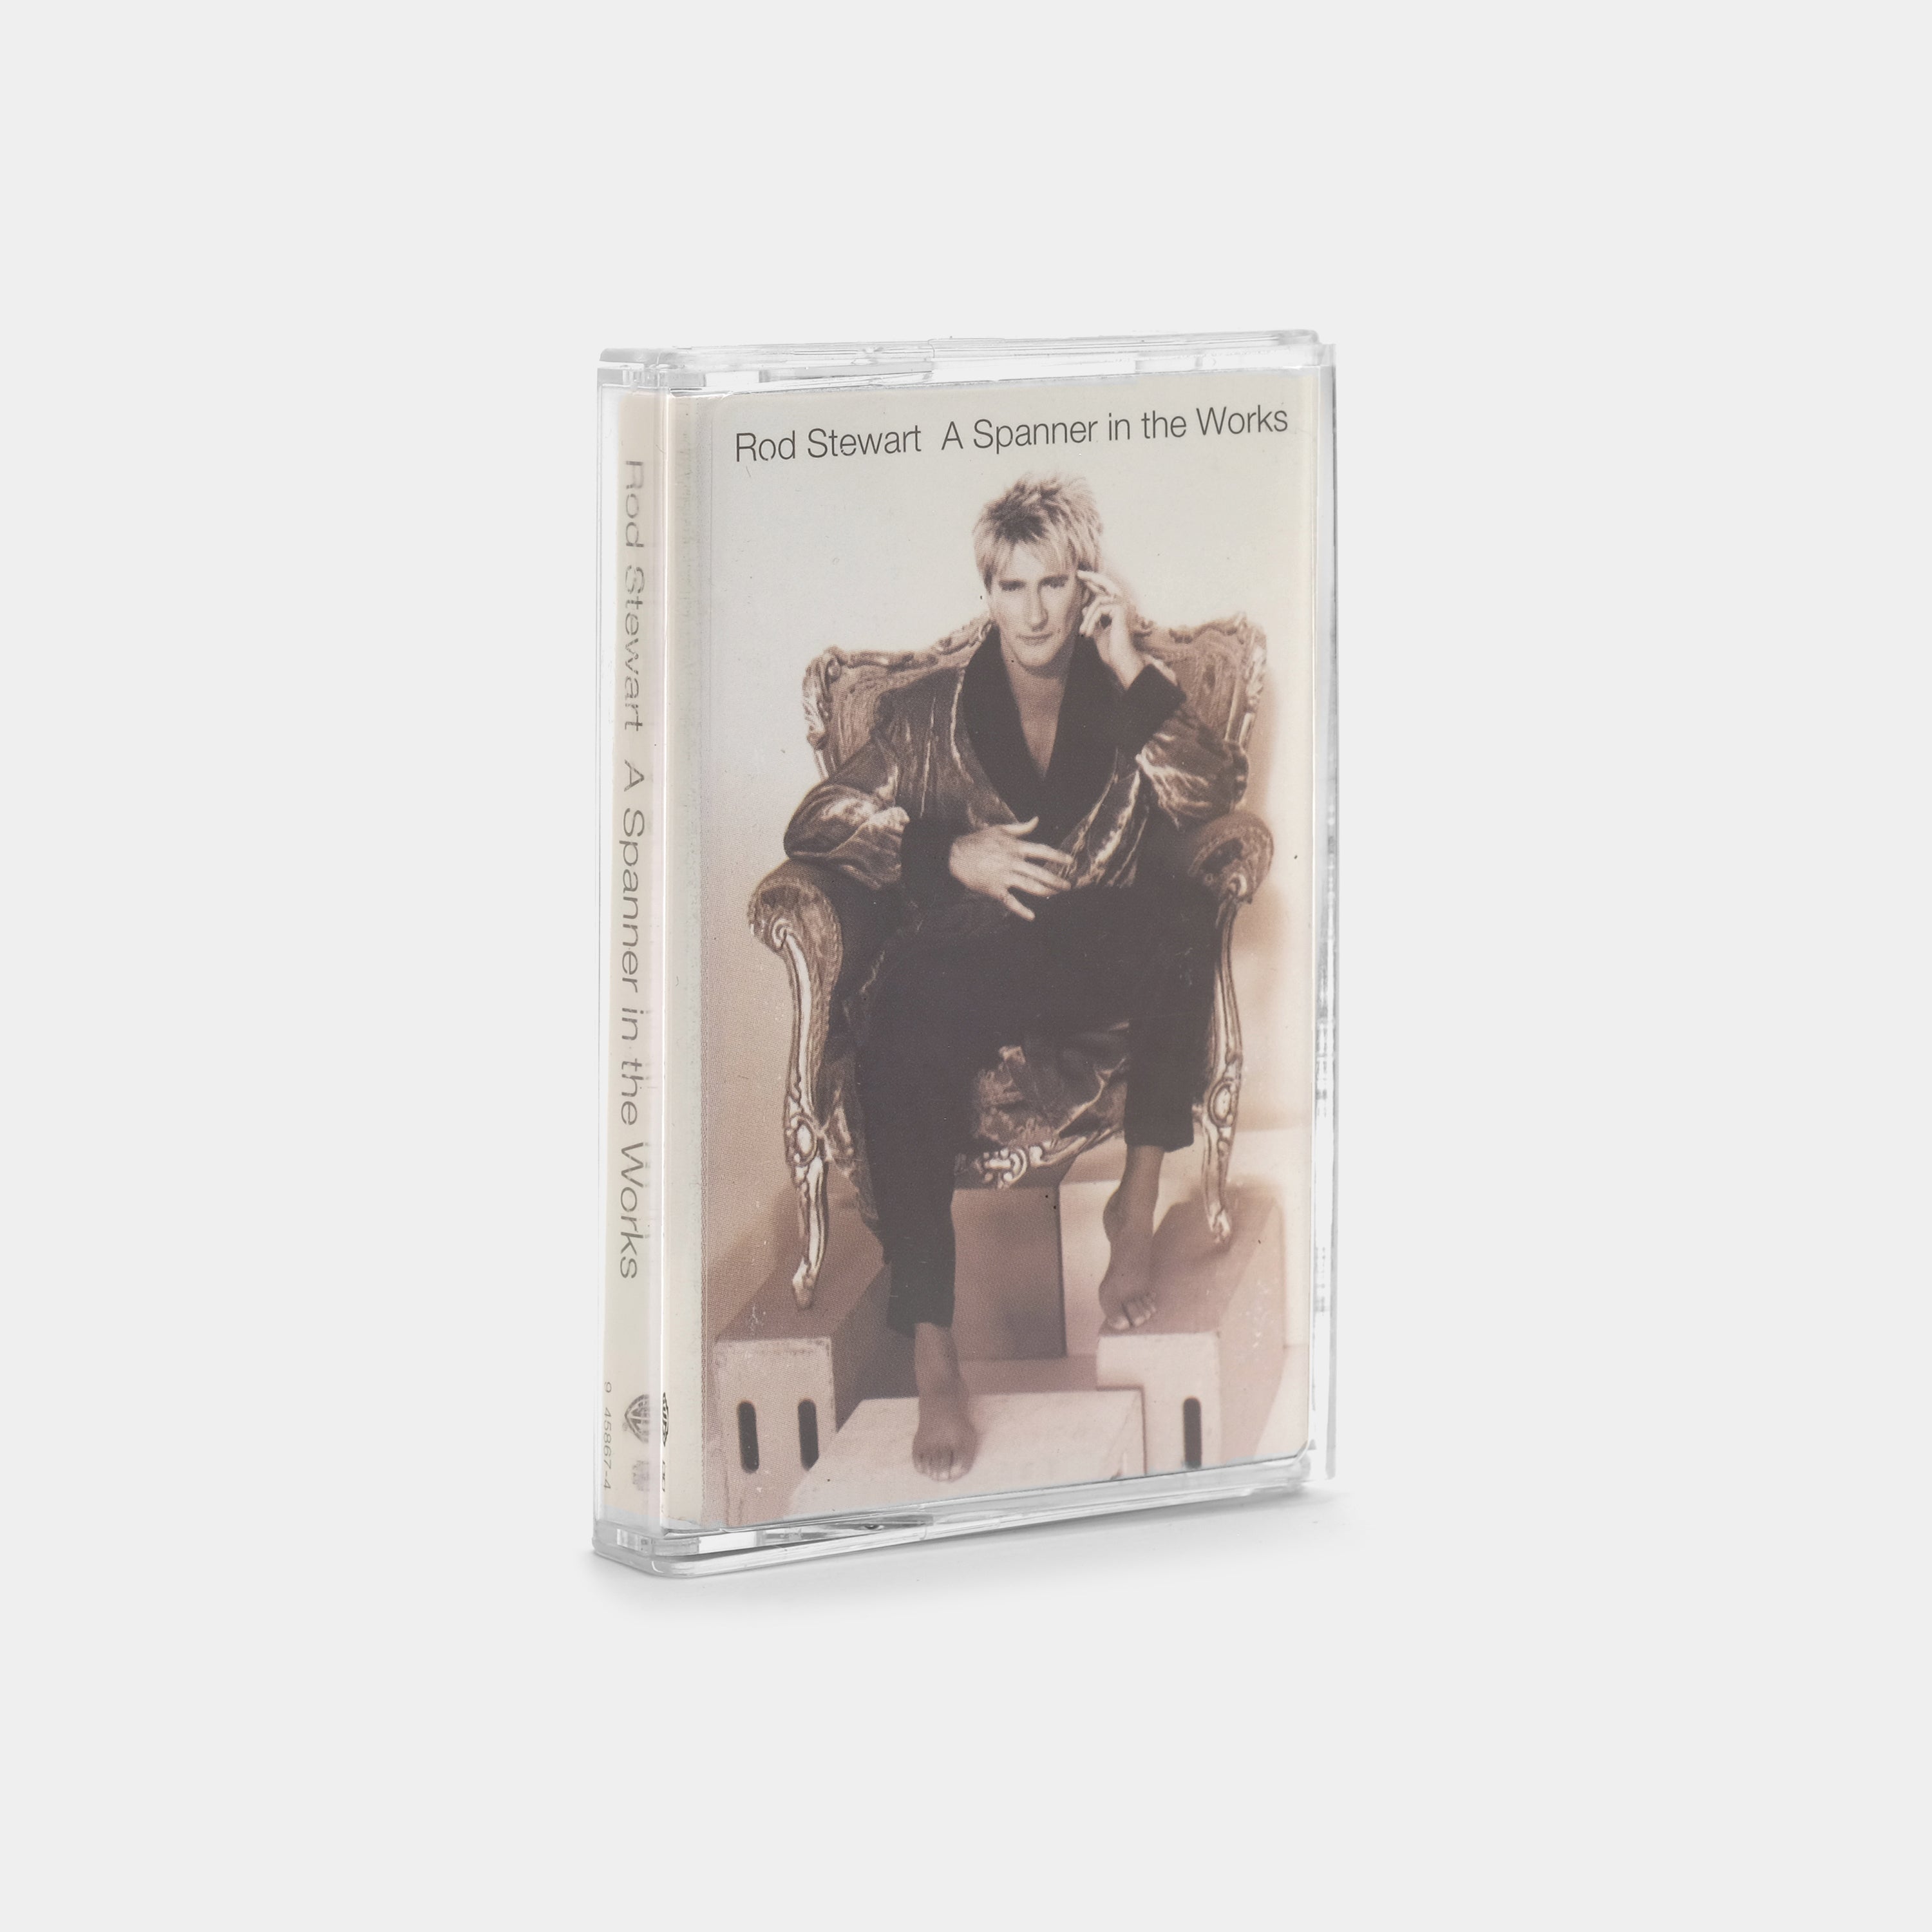 Rod Stewart - A Spanner in the Works Cassette Tape